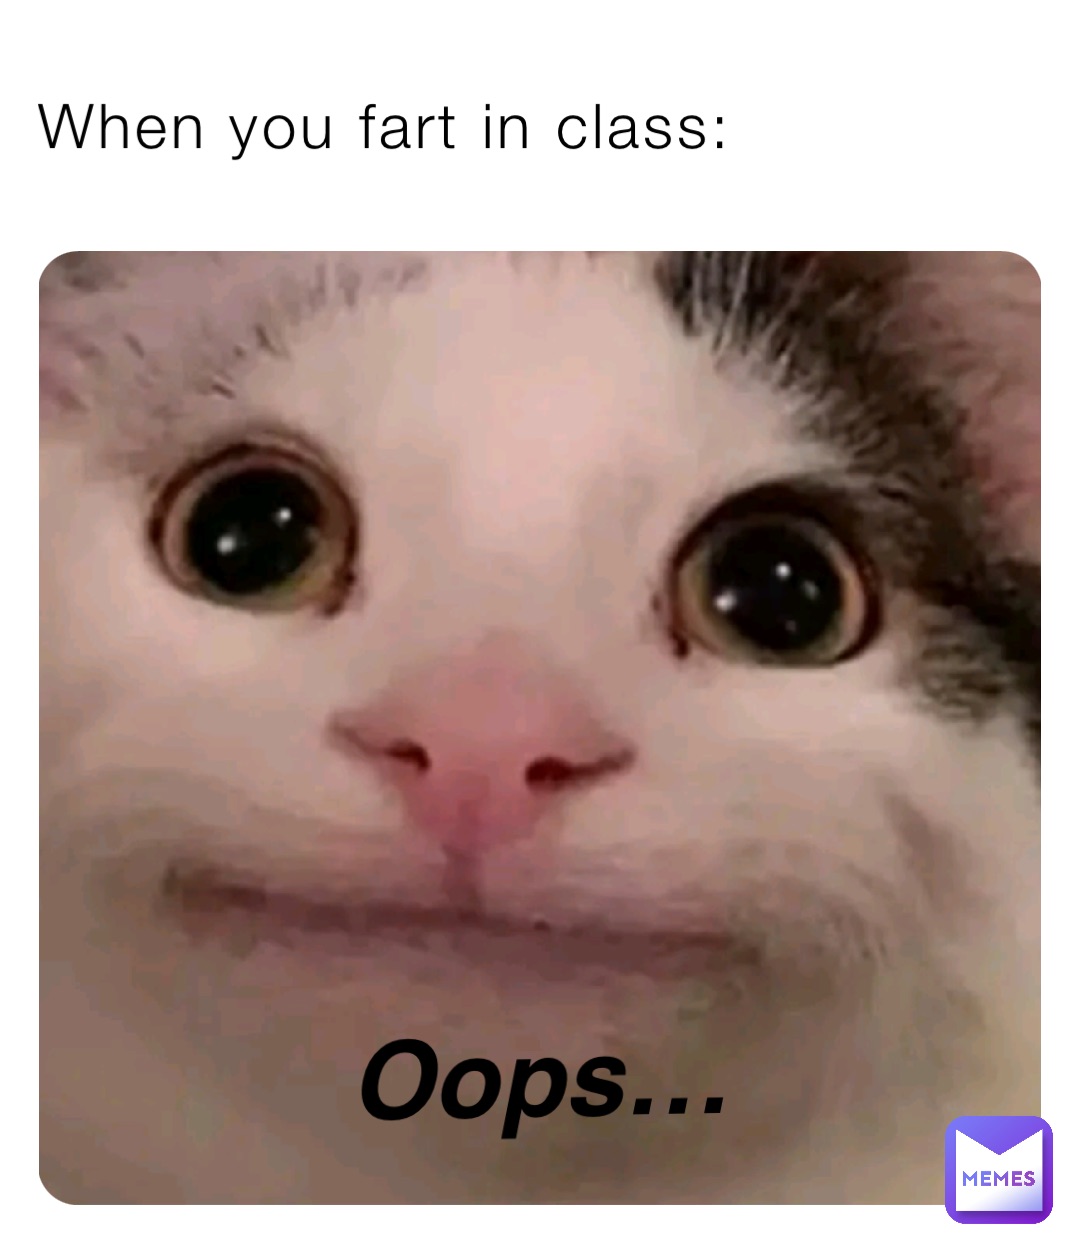 When you fart in class: Oops…